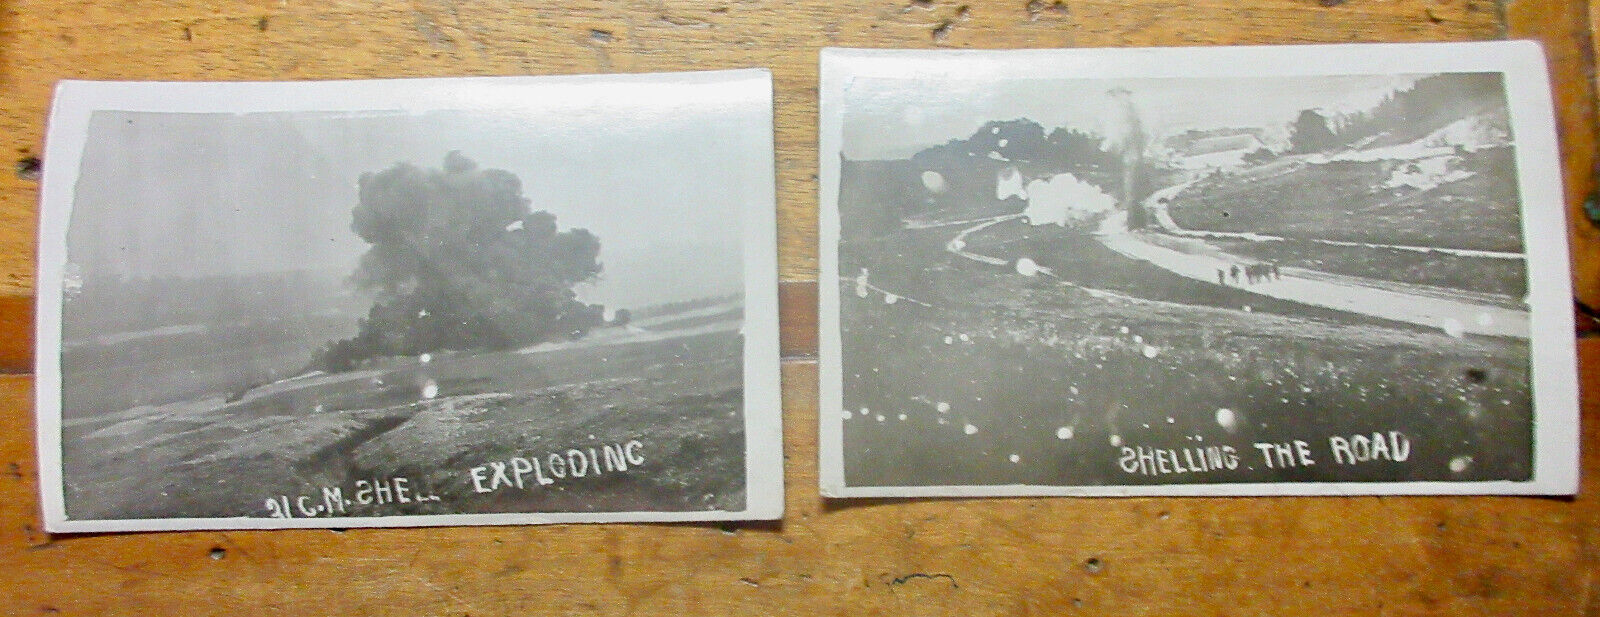 2~ ICONIC WWI RPPC WORLS WAR I POSTCARDS SHELL EXPOLODING SHELLING THE ROAD